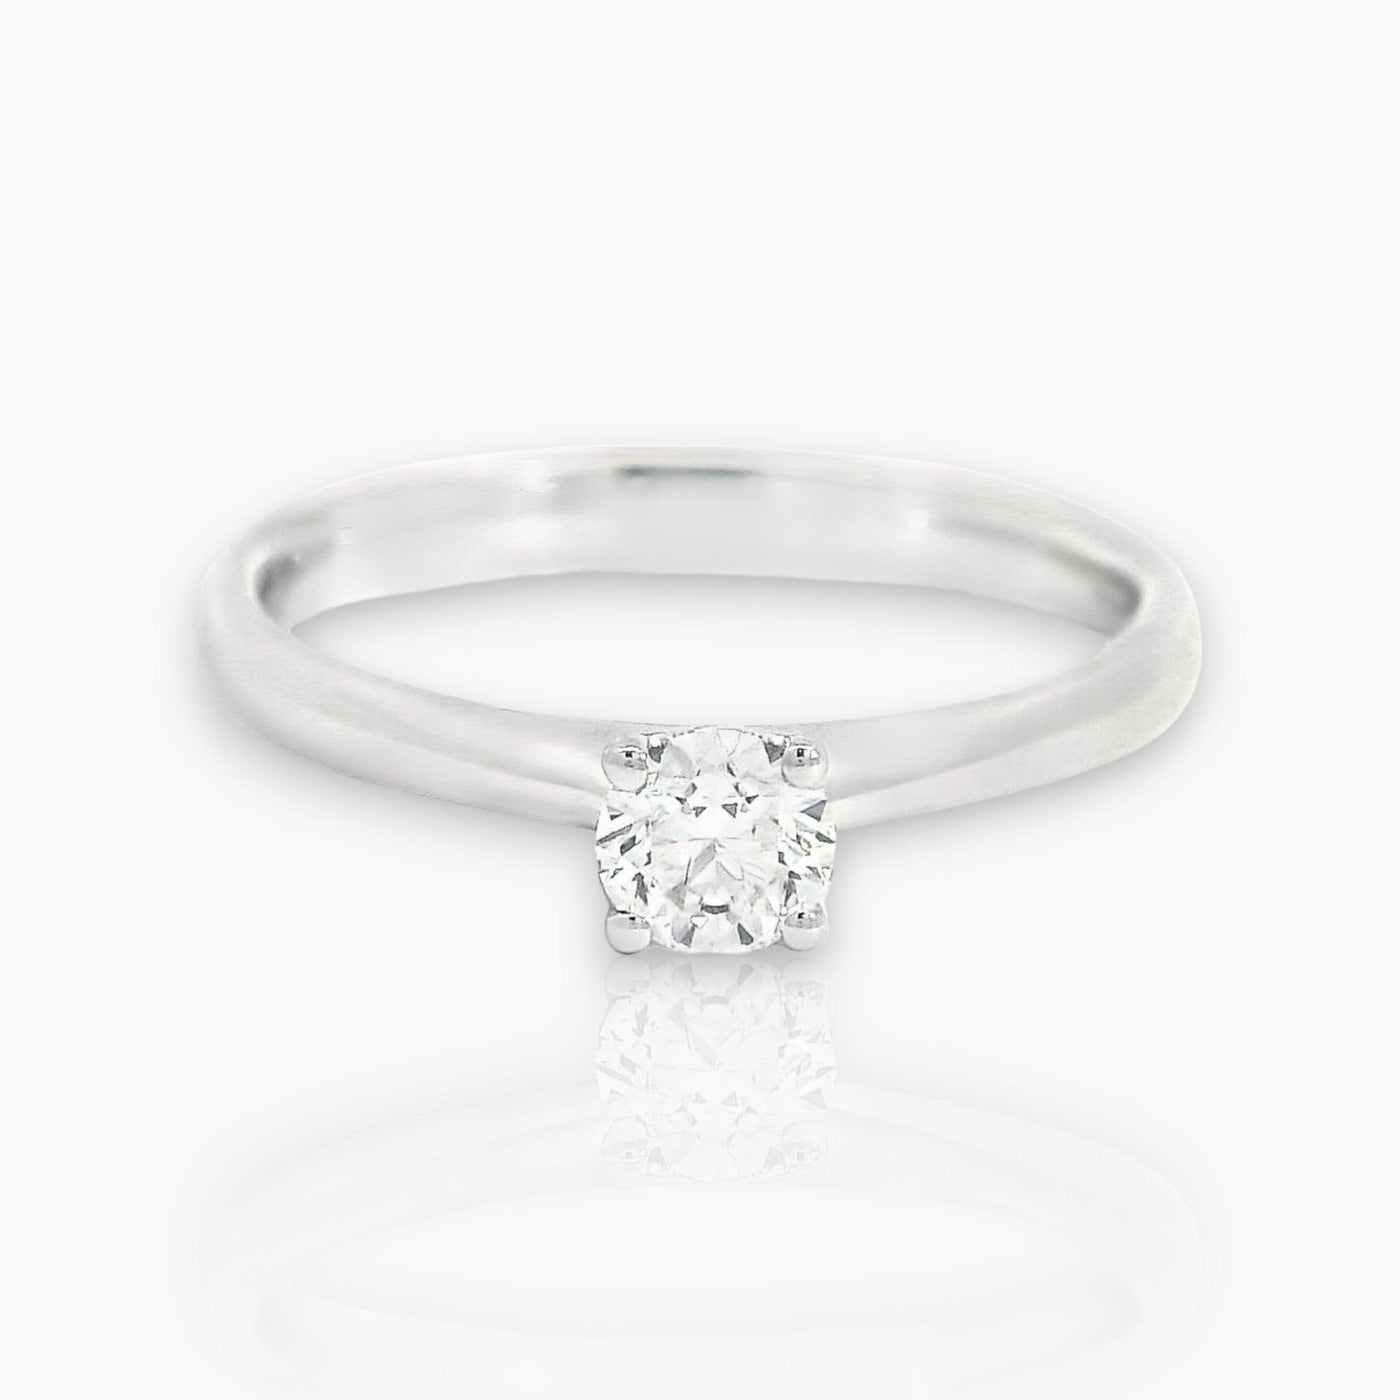 Brilliant Engagement Ring with 4 prongs (in 8 diamond sizes) - Moregola Fine Jewelry